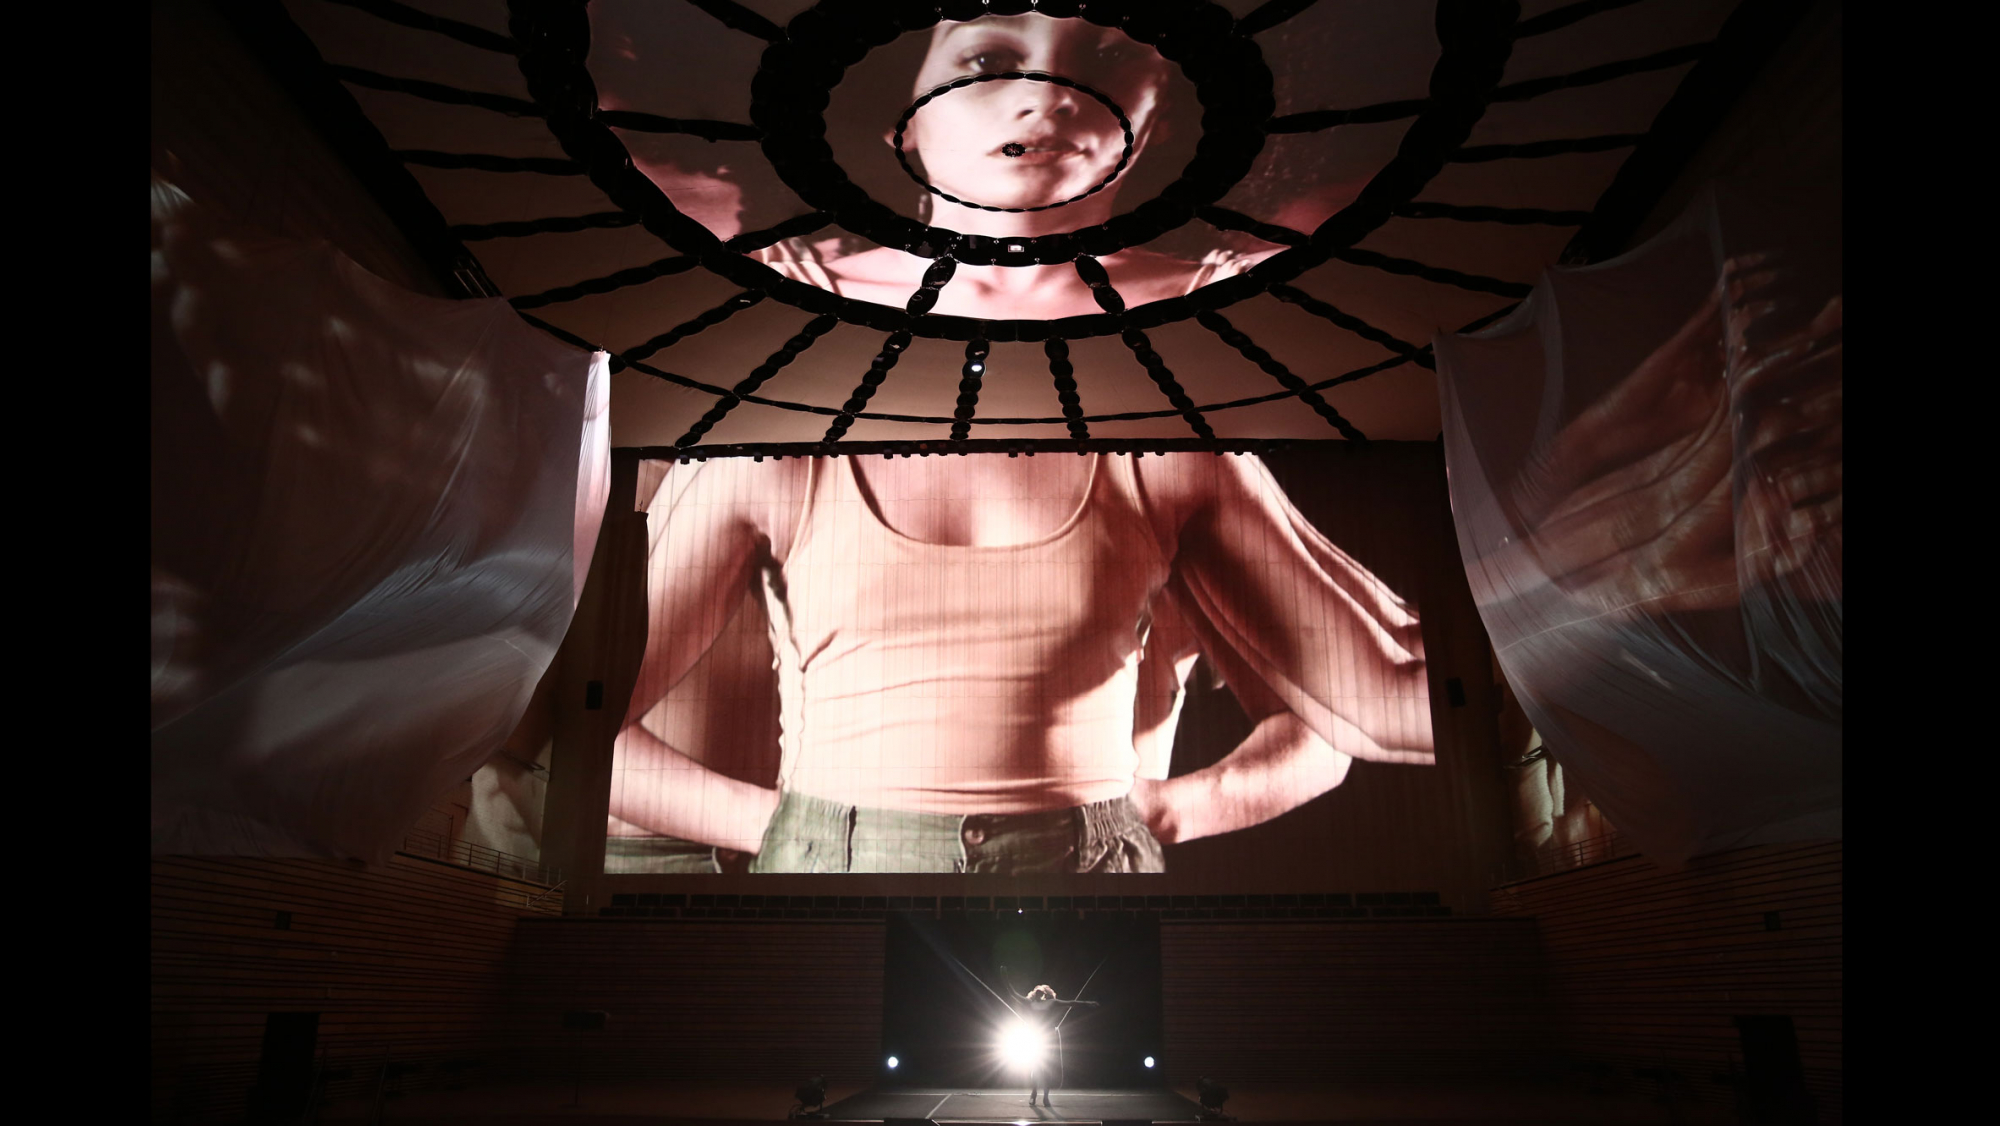 Projections of a female on the concert hall stage. Her head on the ceiling, torso on the back wall and arms outstretched on flowing fabric hung from the sides of the stage. 